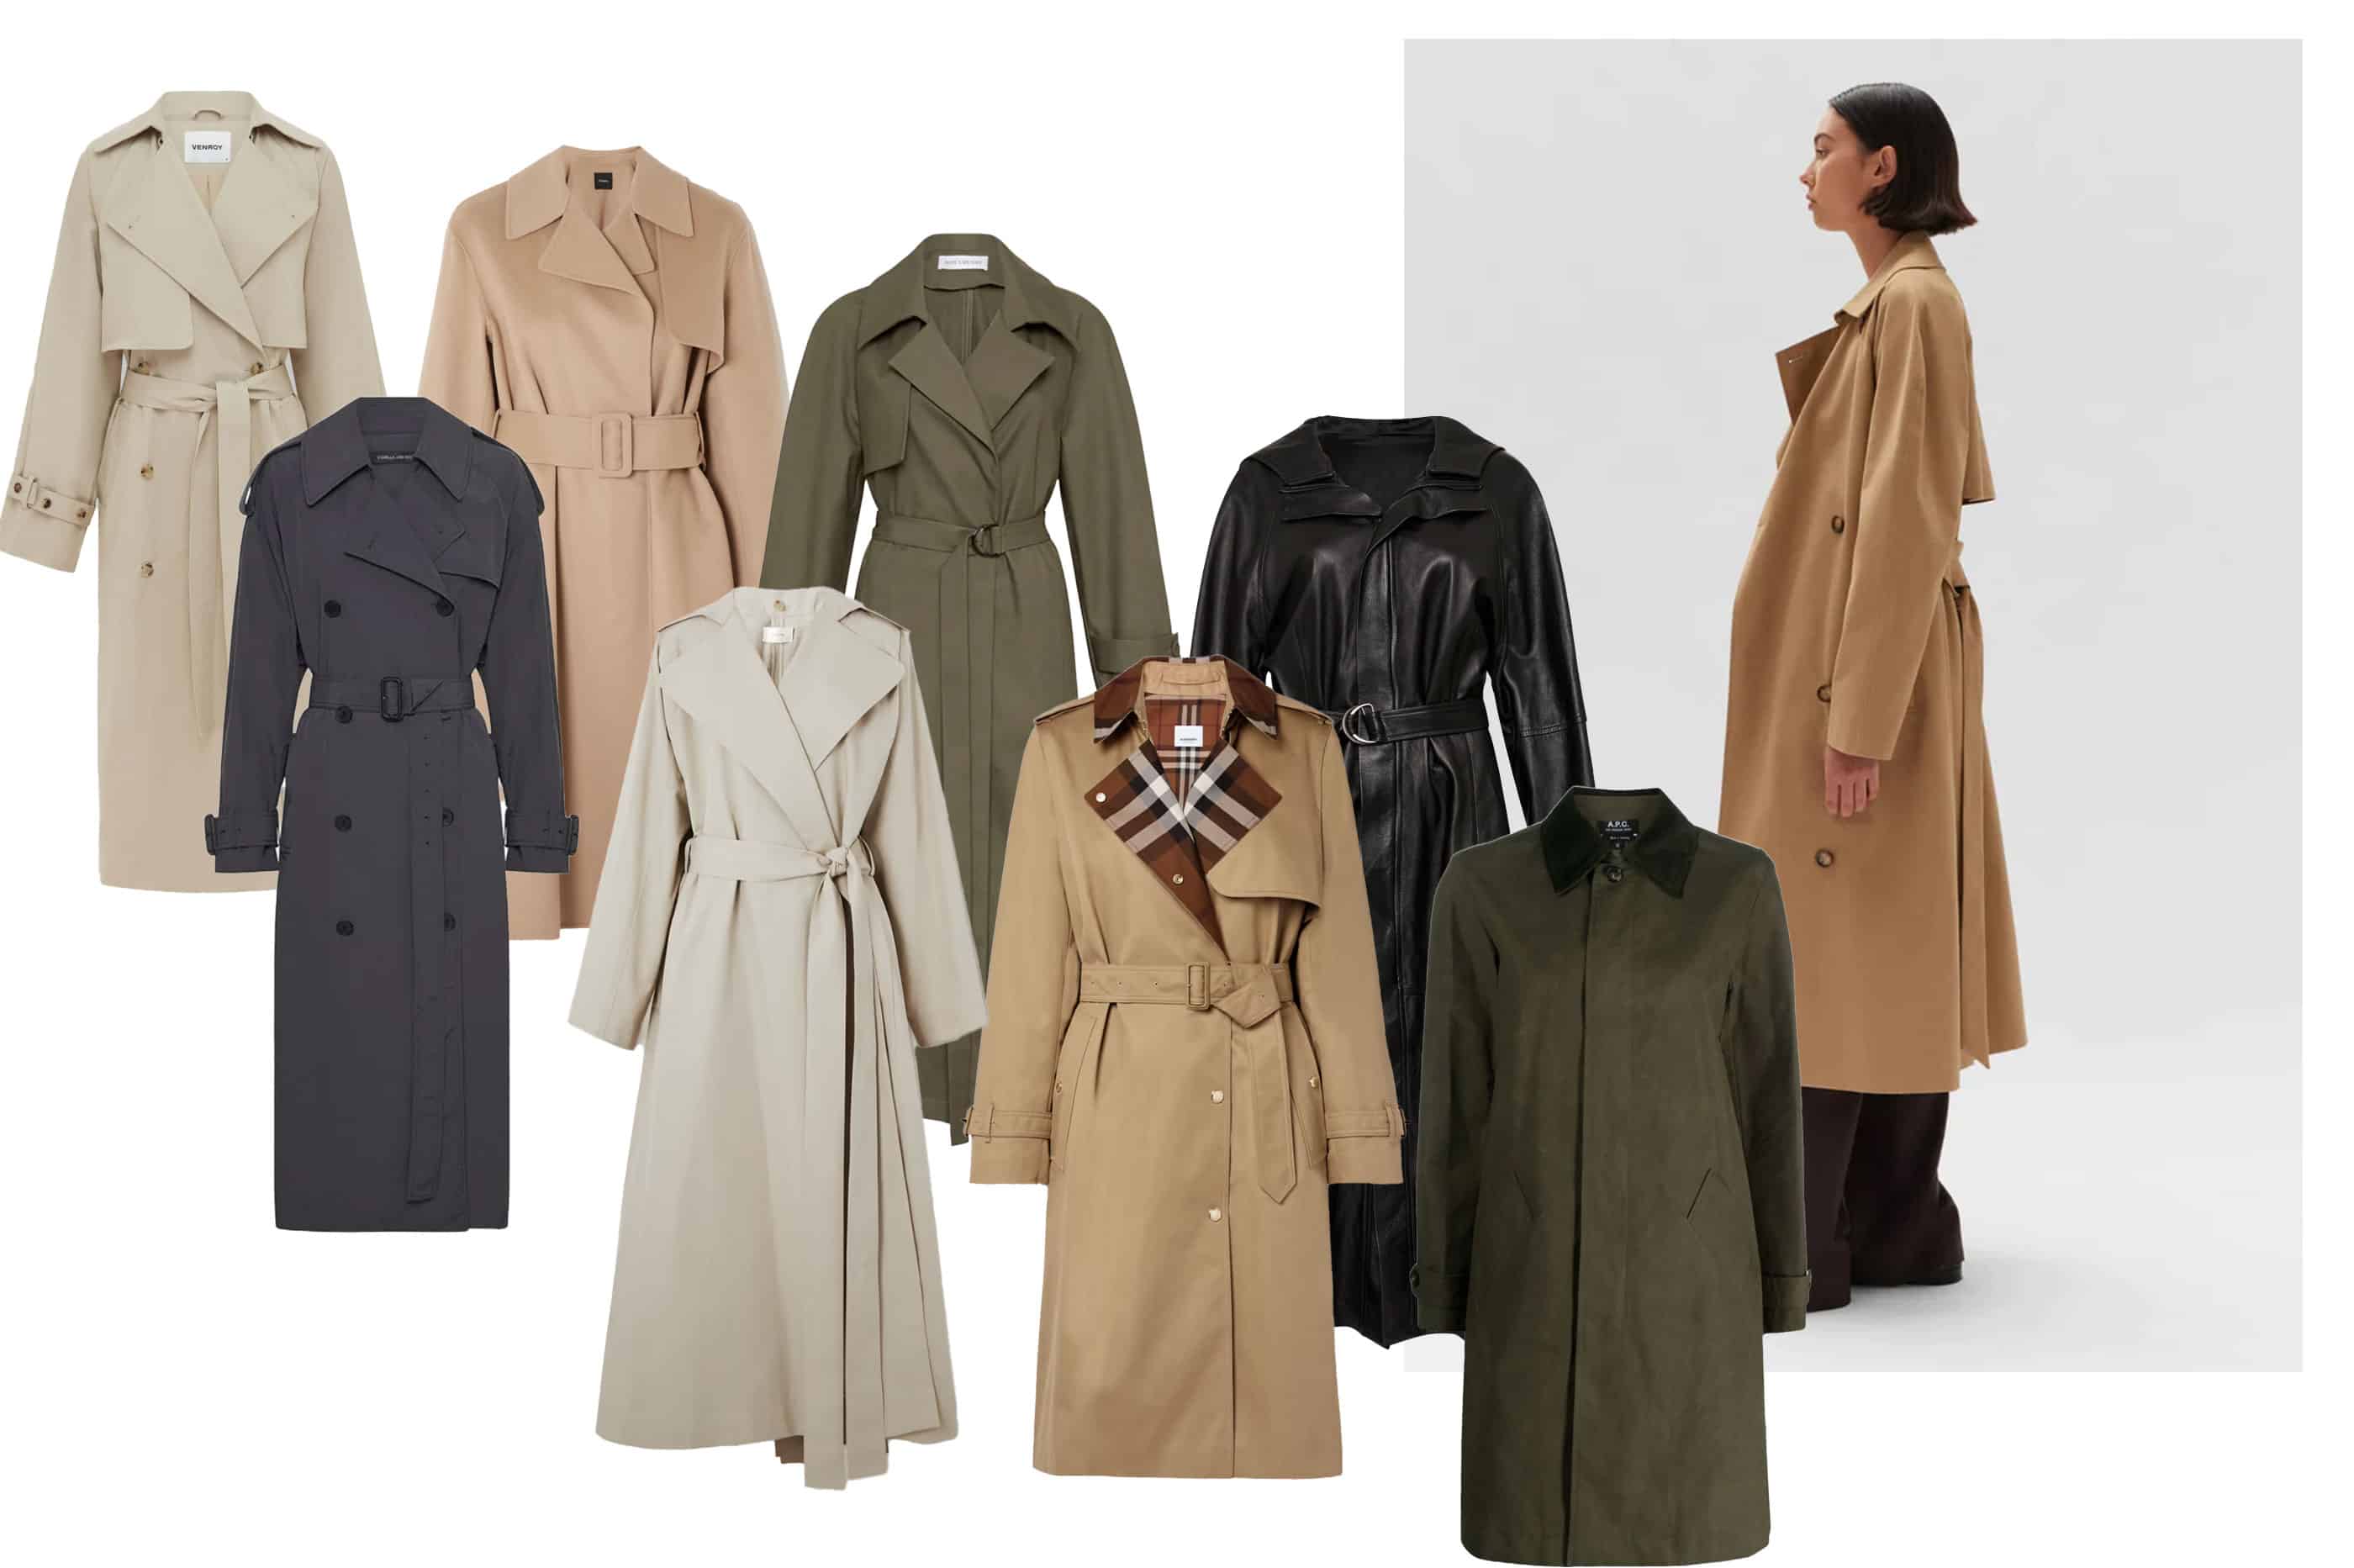 10 Best Trench Coats For Spring 2018 - 10 Trench Coats to Try This